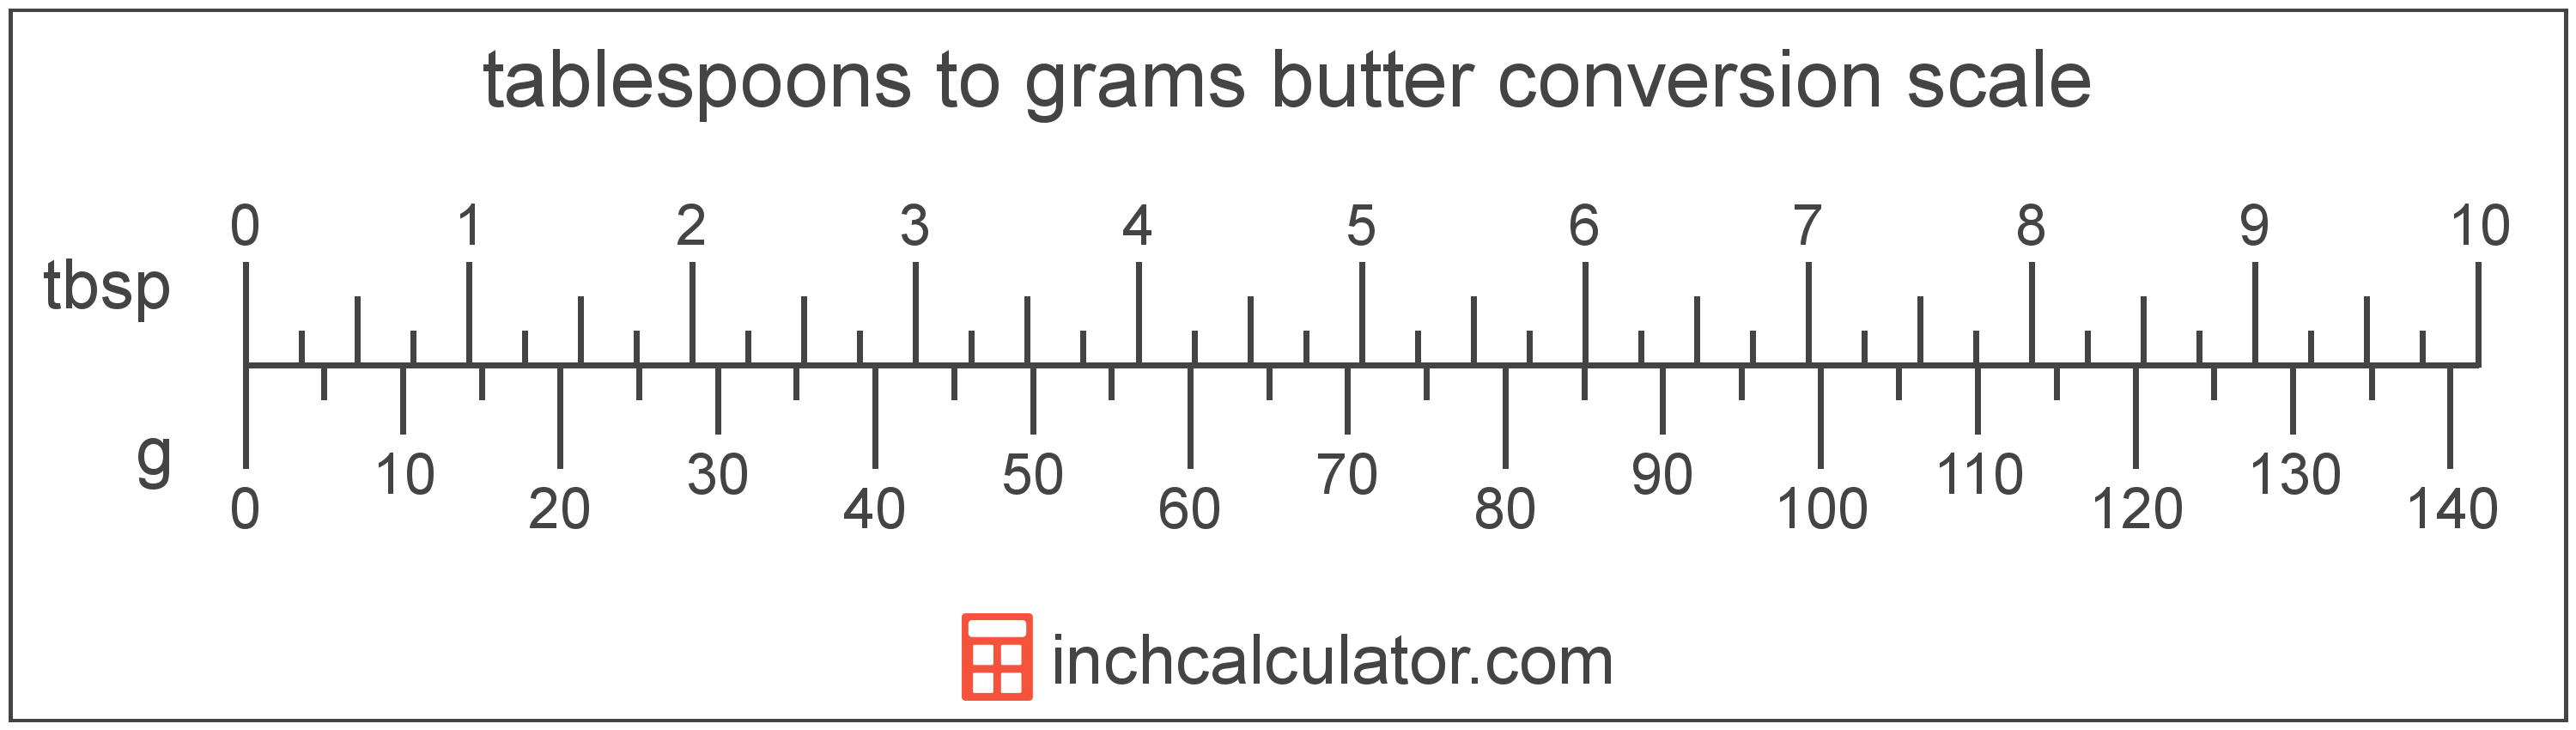 conversion scale showing grams and equivalent tablespoons butter values